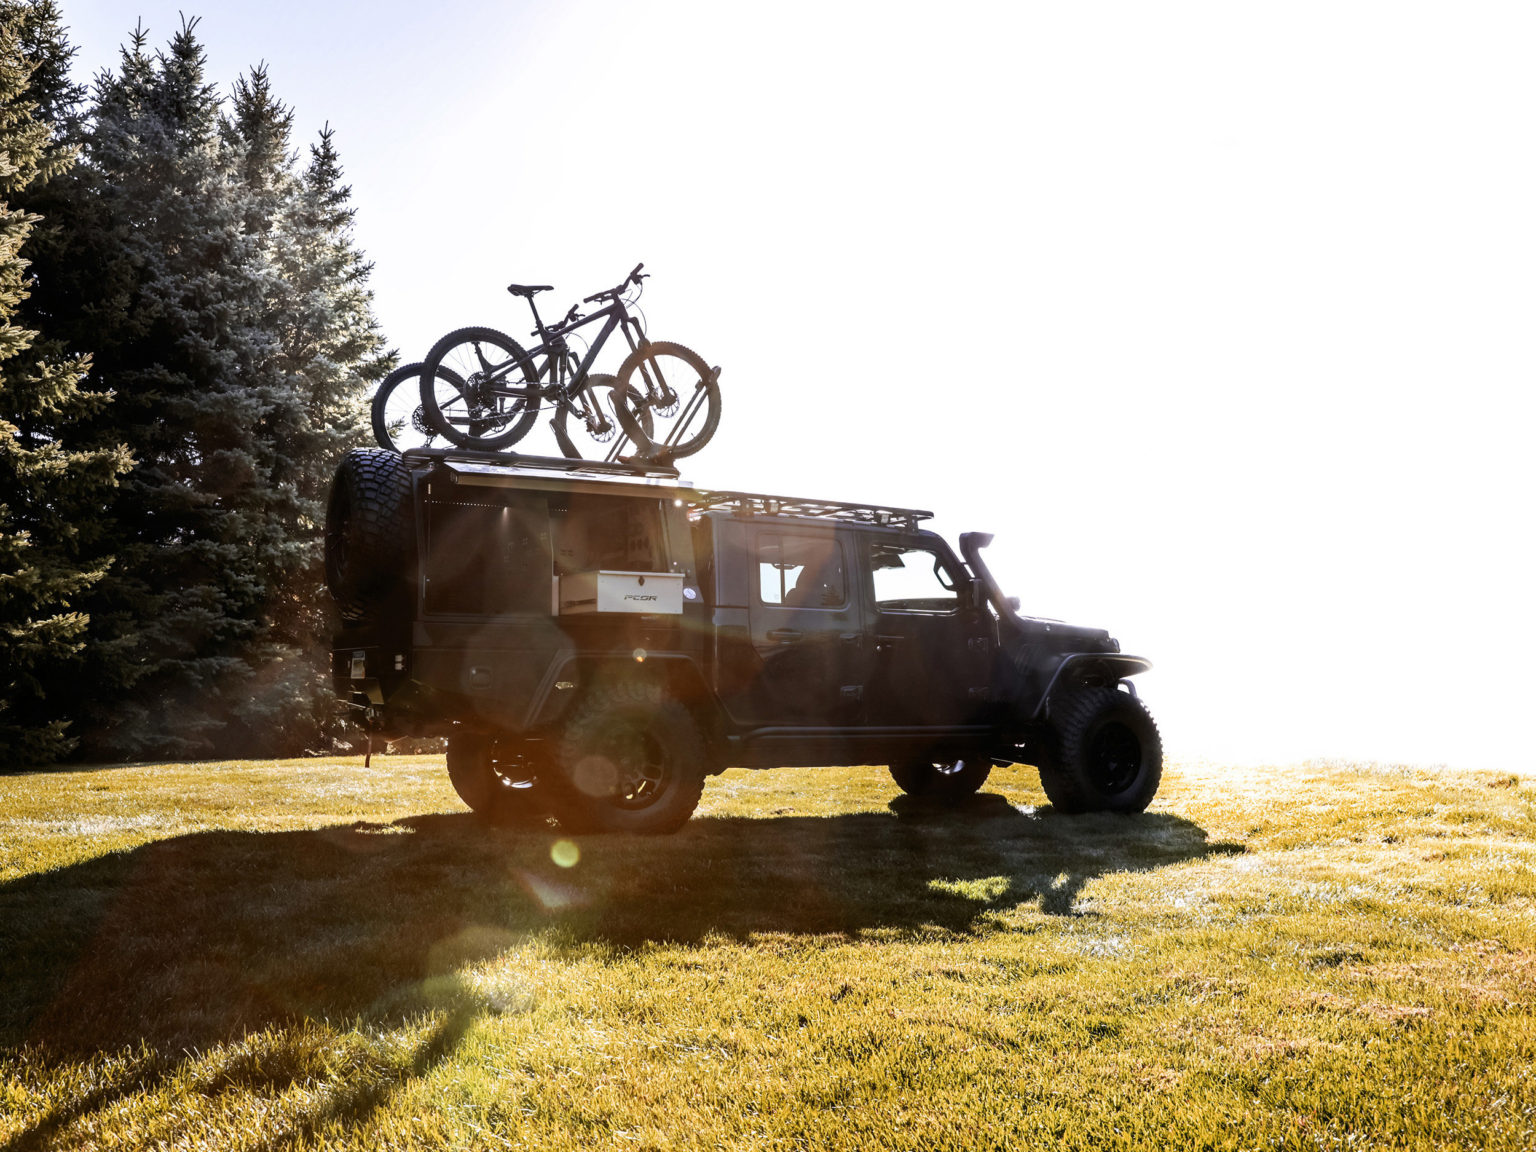 The new Jeep Gladiator Top Dog Concept is made for mountain bikers.